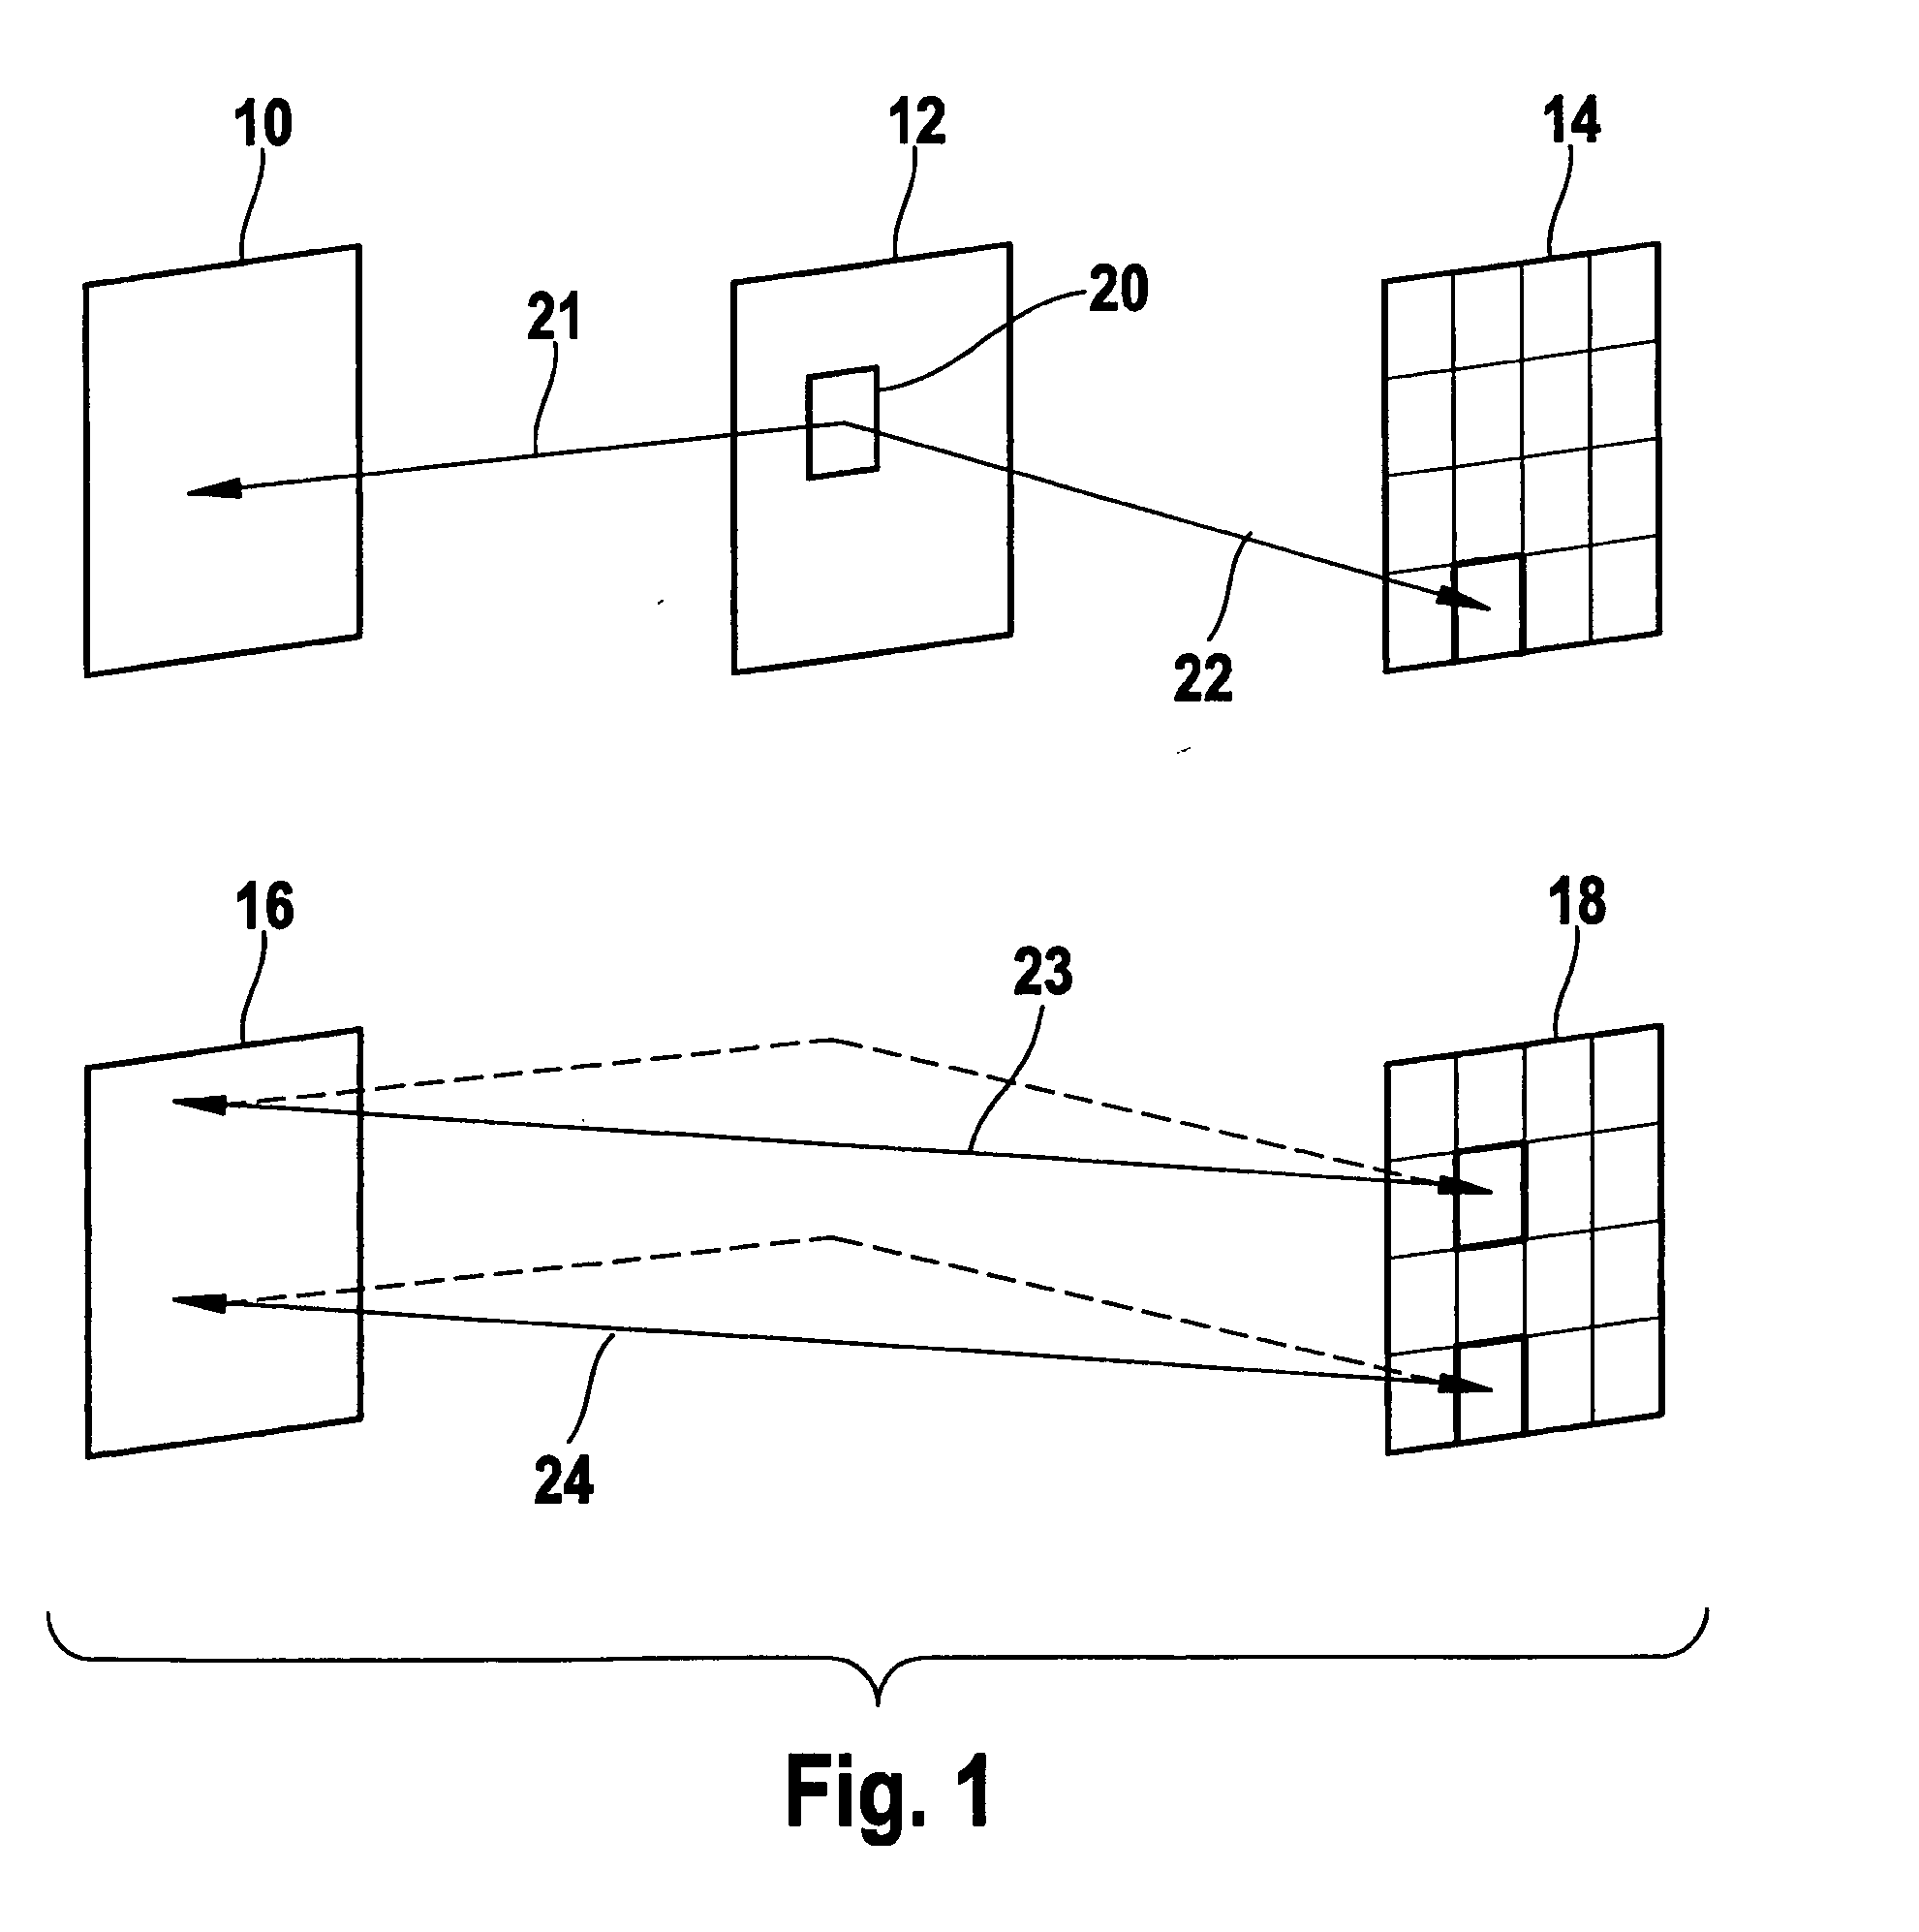 Method for compressing data in a video sequence